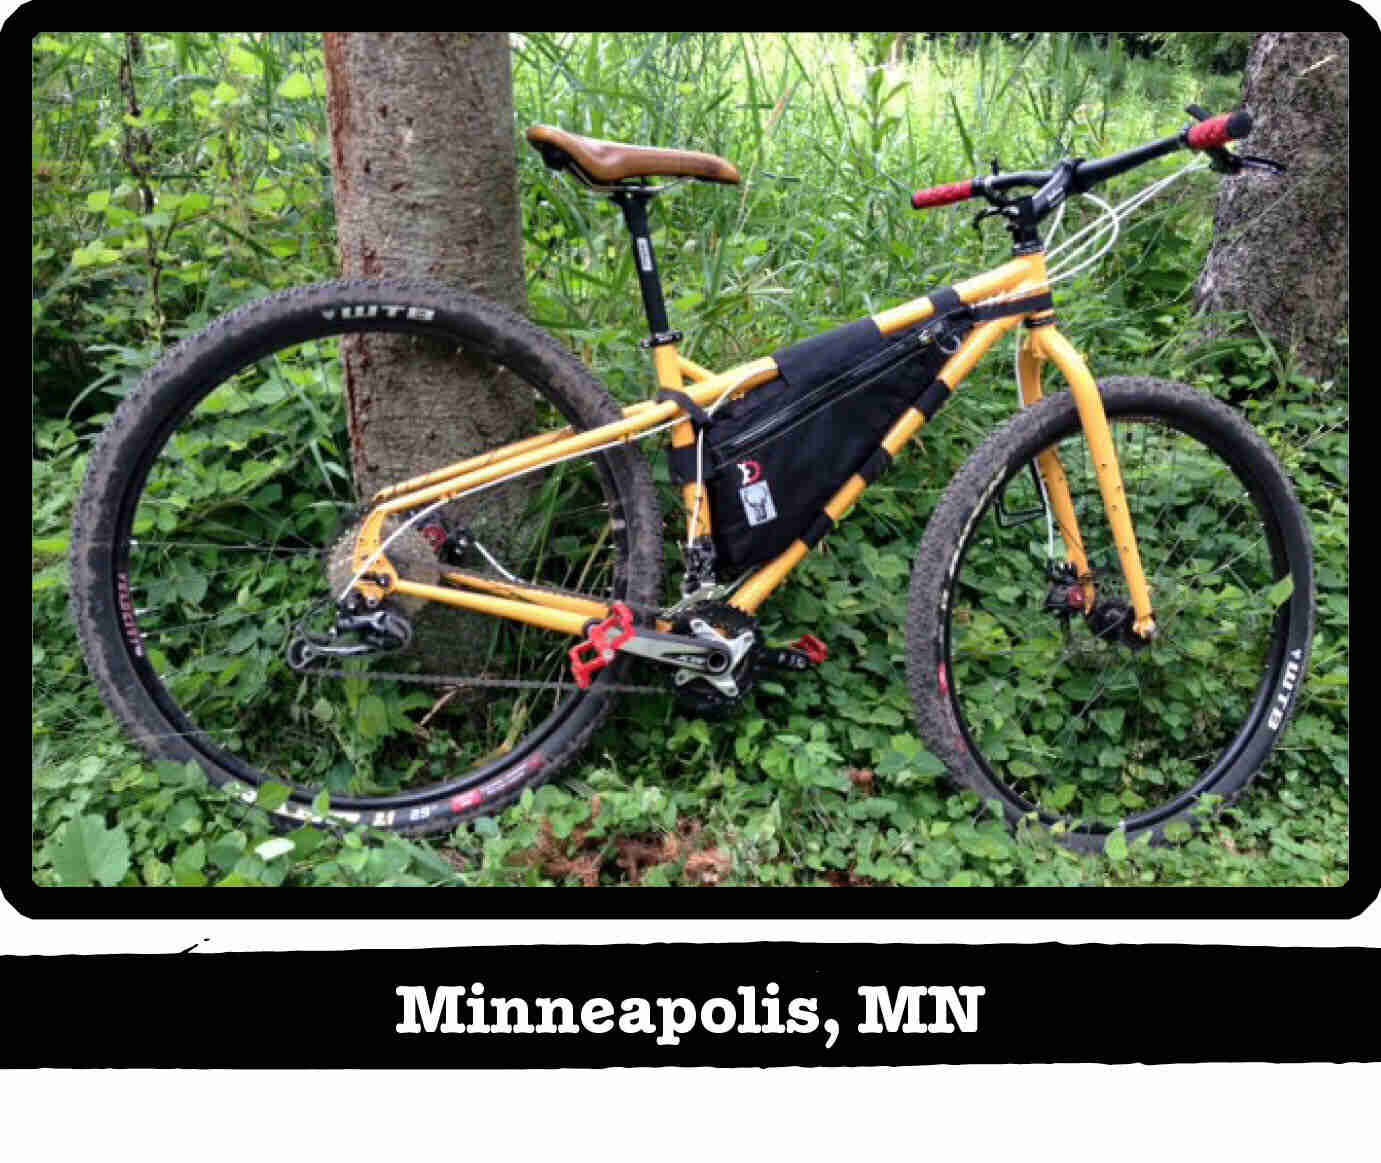 Right side view of a Surly ECR bike, yellow, against a tree in the weeds - Minneapolis, MN tag below image